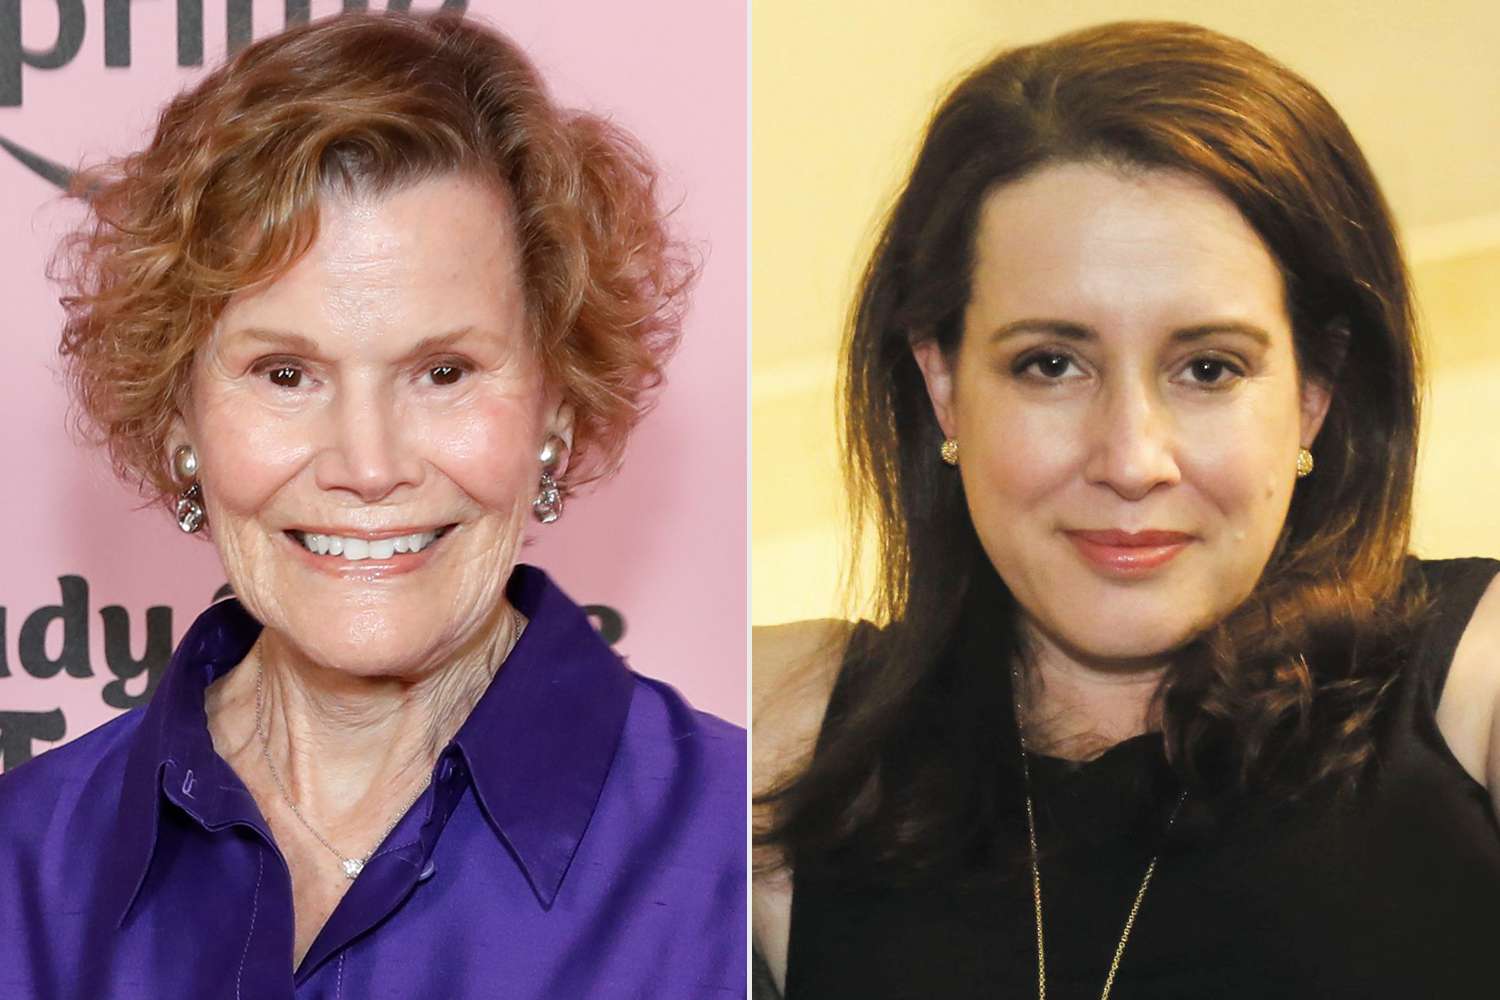 New Coalition Against Book Bans Launches Nationwide With Support From Authors Like Judy Blume and Julia Quinn